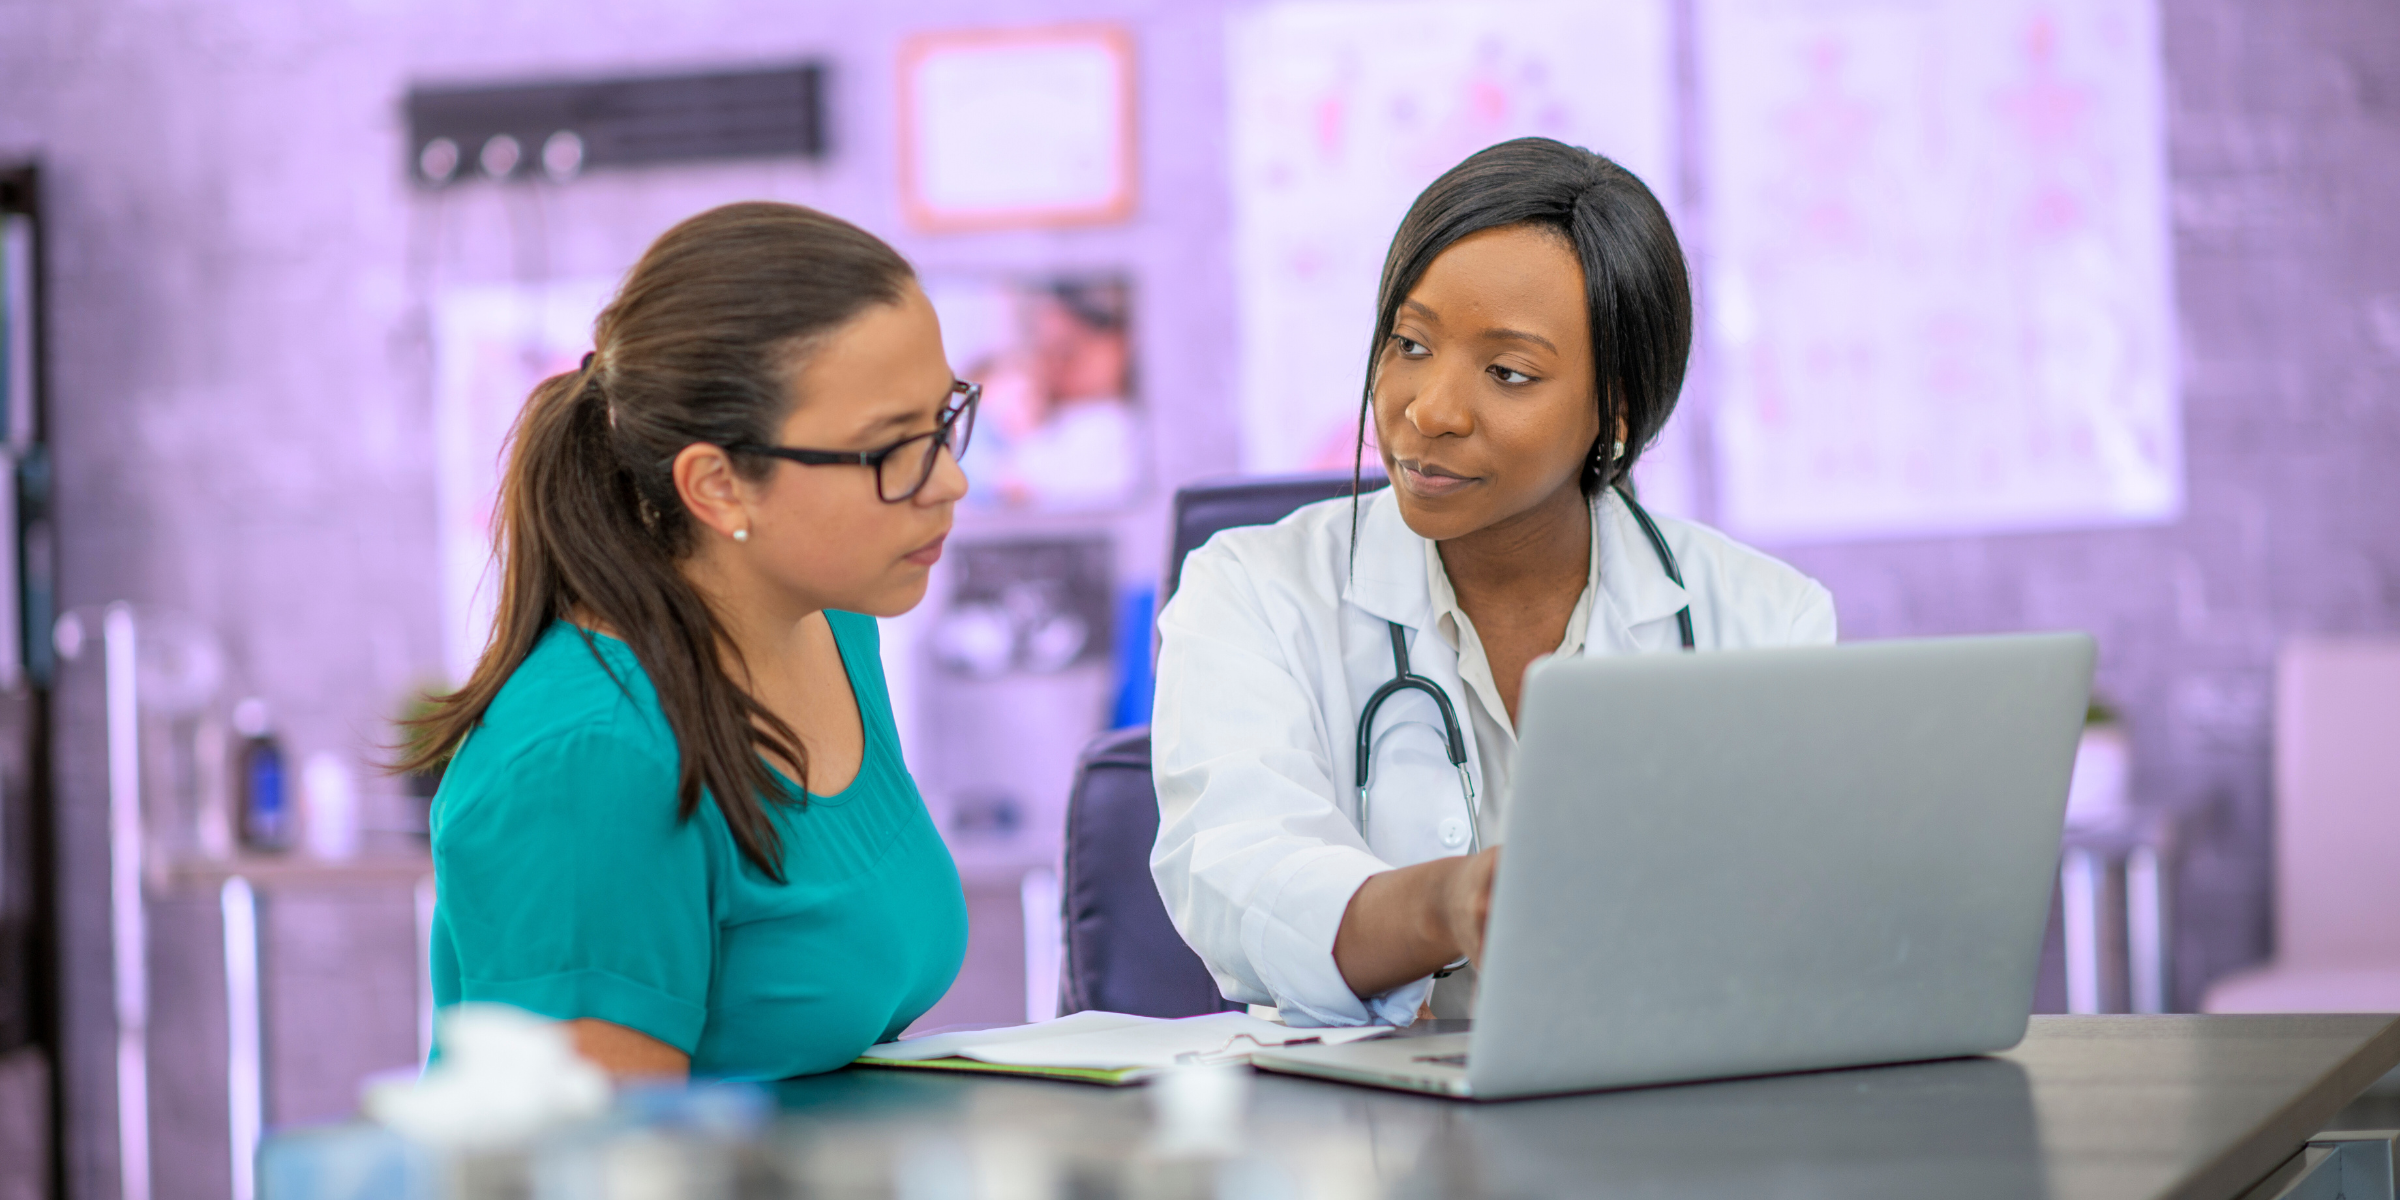 black doctor talking to female patient about change her health routines